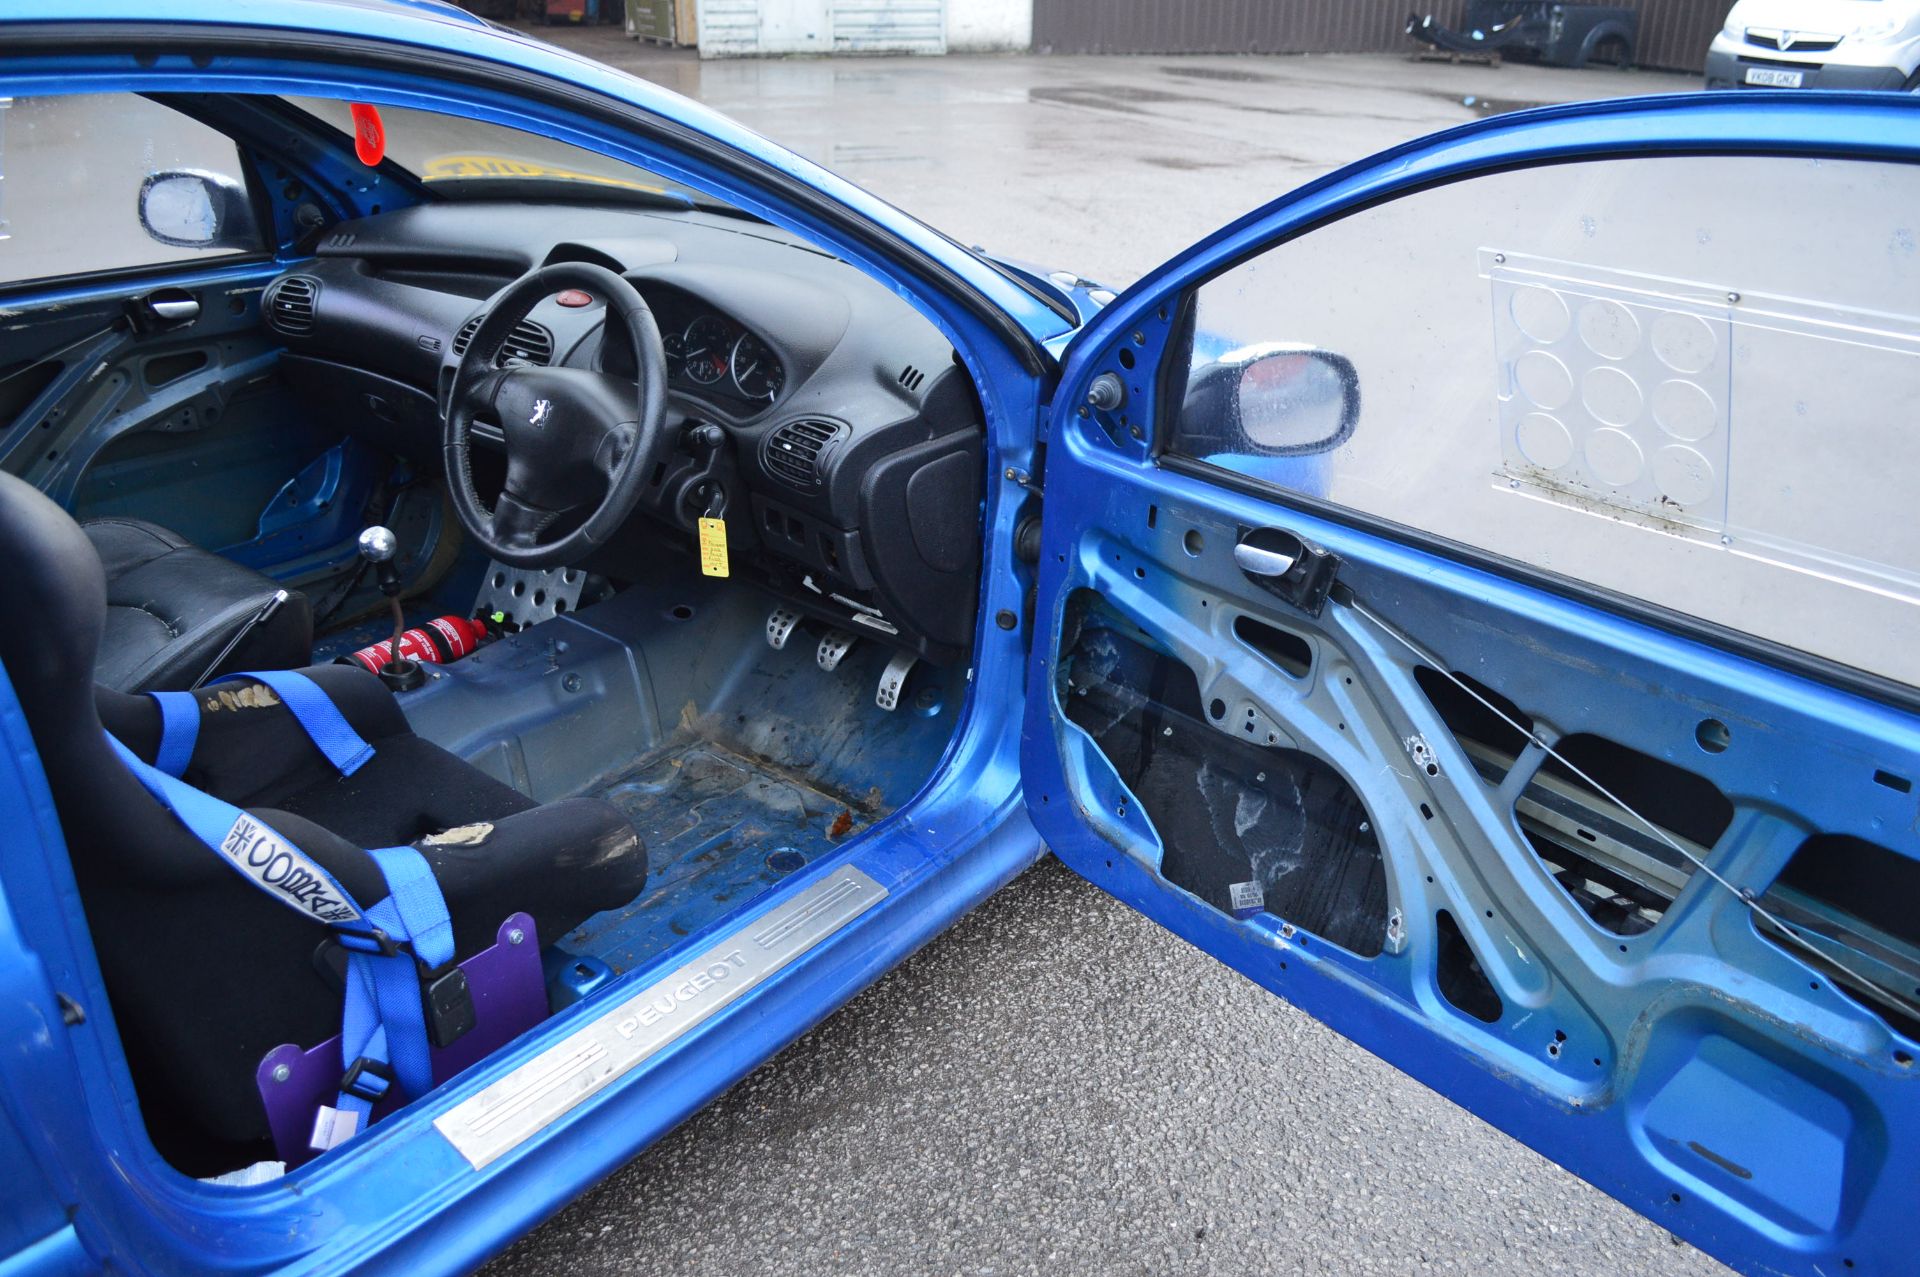 2003/03 REG PEUGEOT 206 GTI 180HP FAST TRACK DAY CAR  HAS THE 'VAN' PANELS FITTED INSTEAD OF REAR - Image 10 of 14